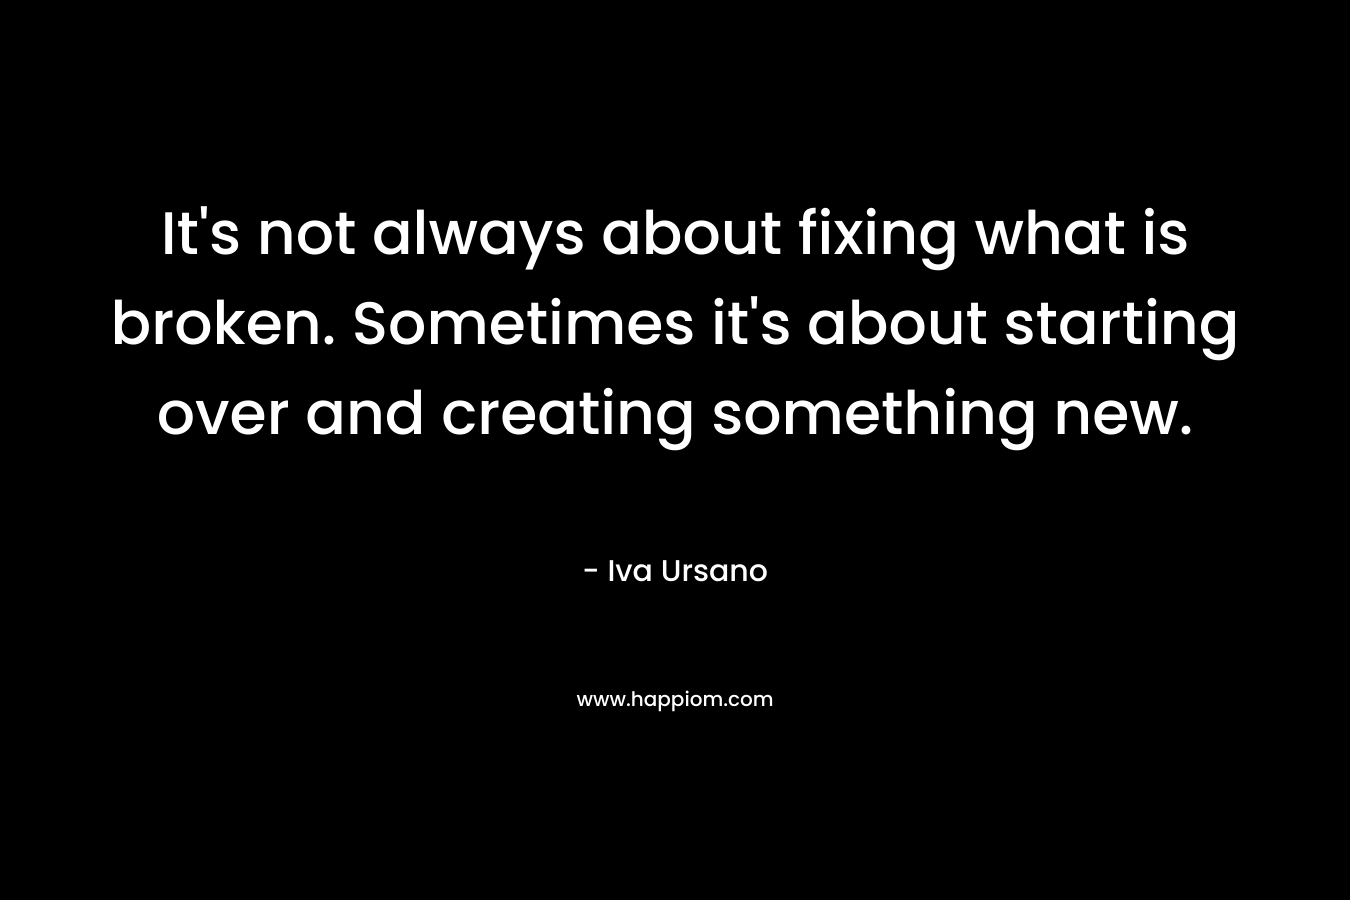 It's not always about fixing what is broken. Sometimes it's about starting over and creating something new.